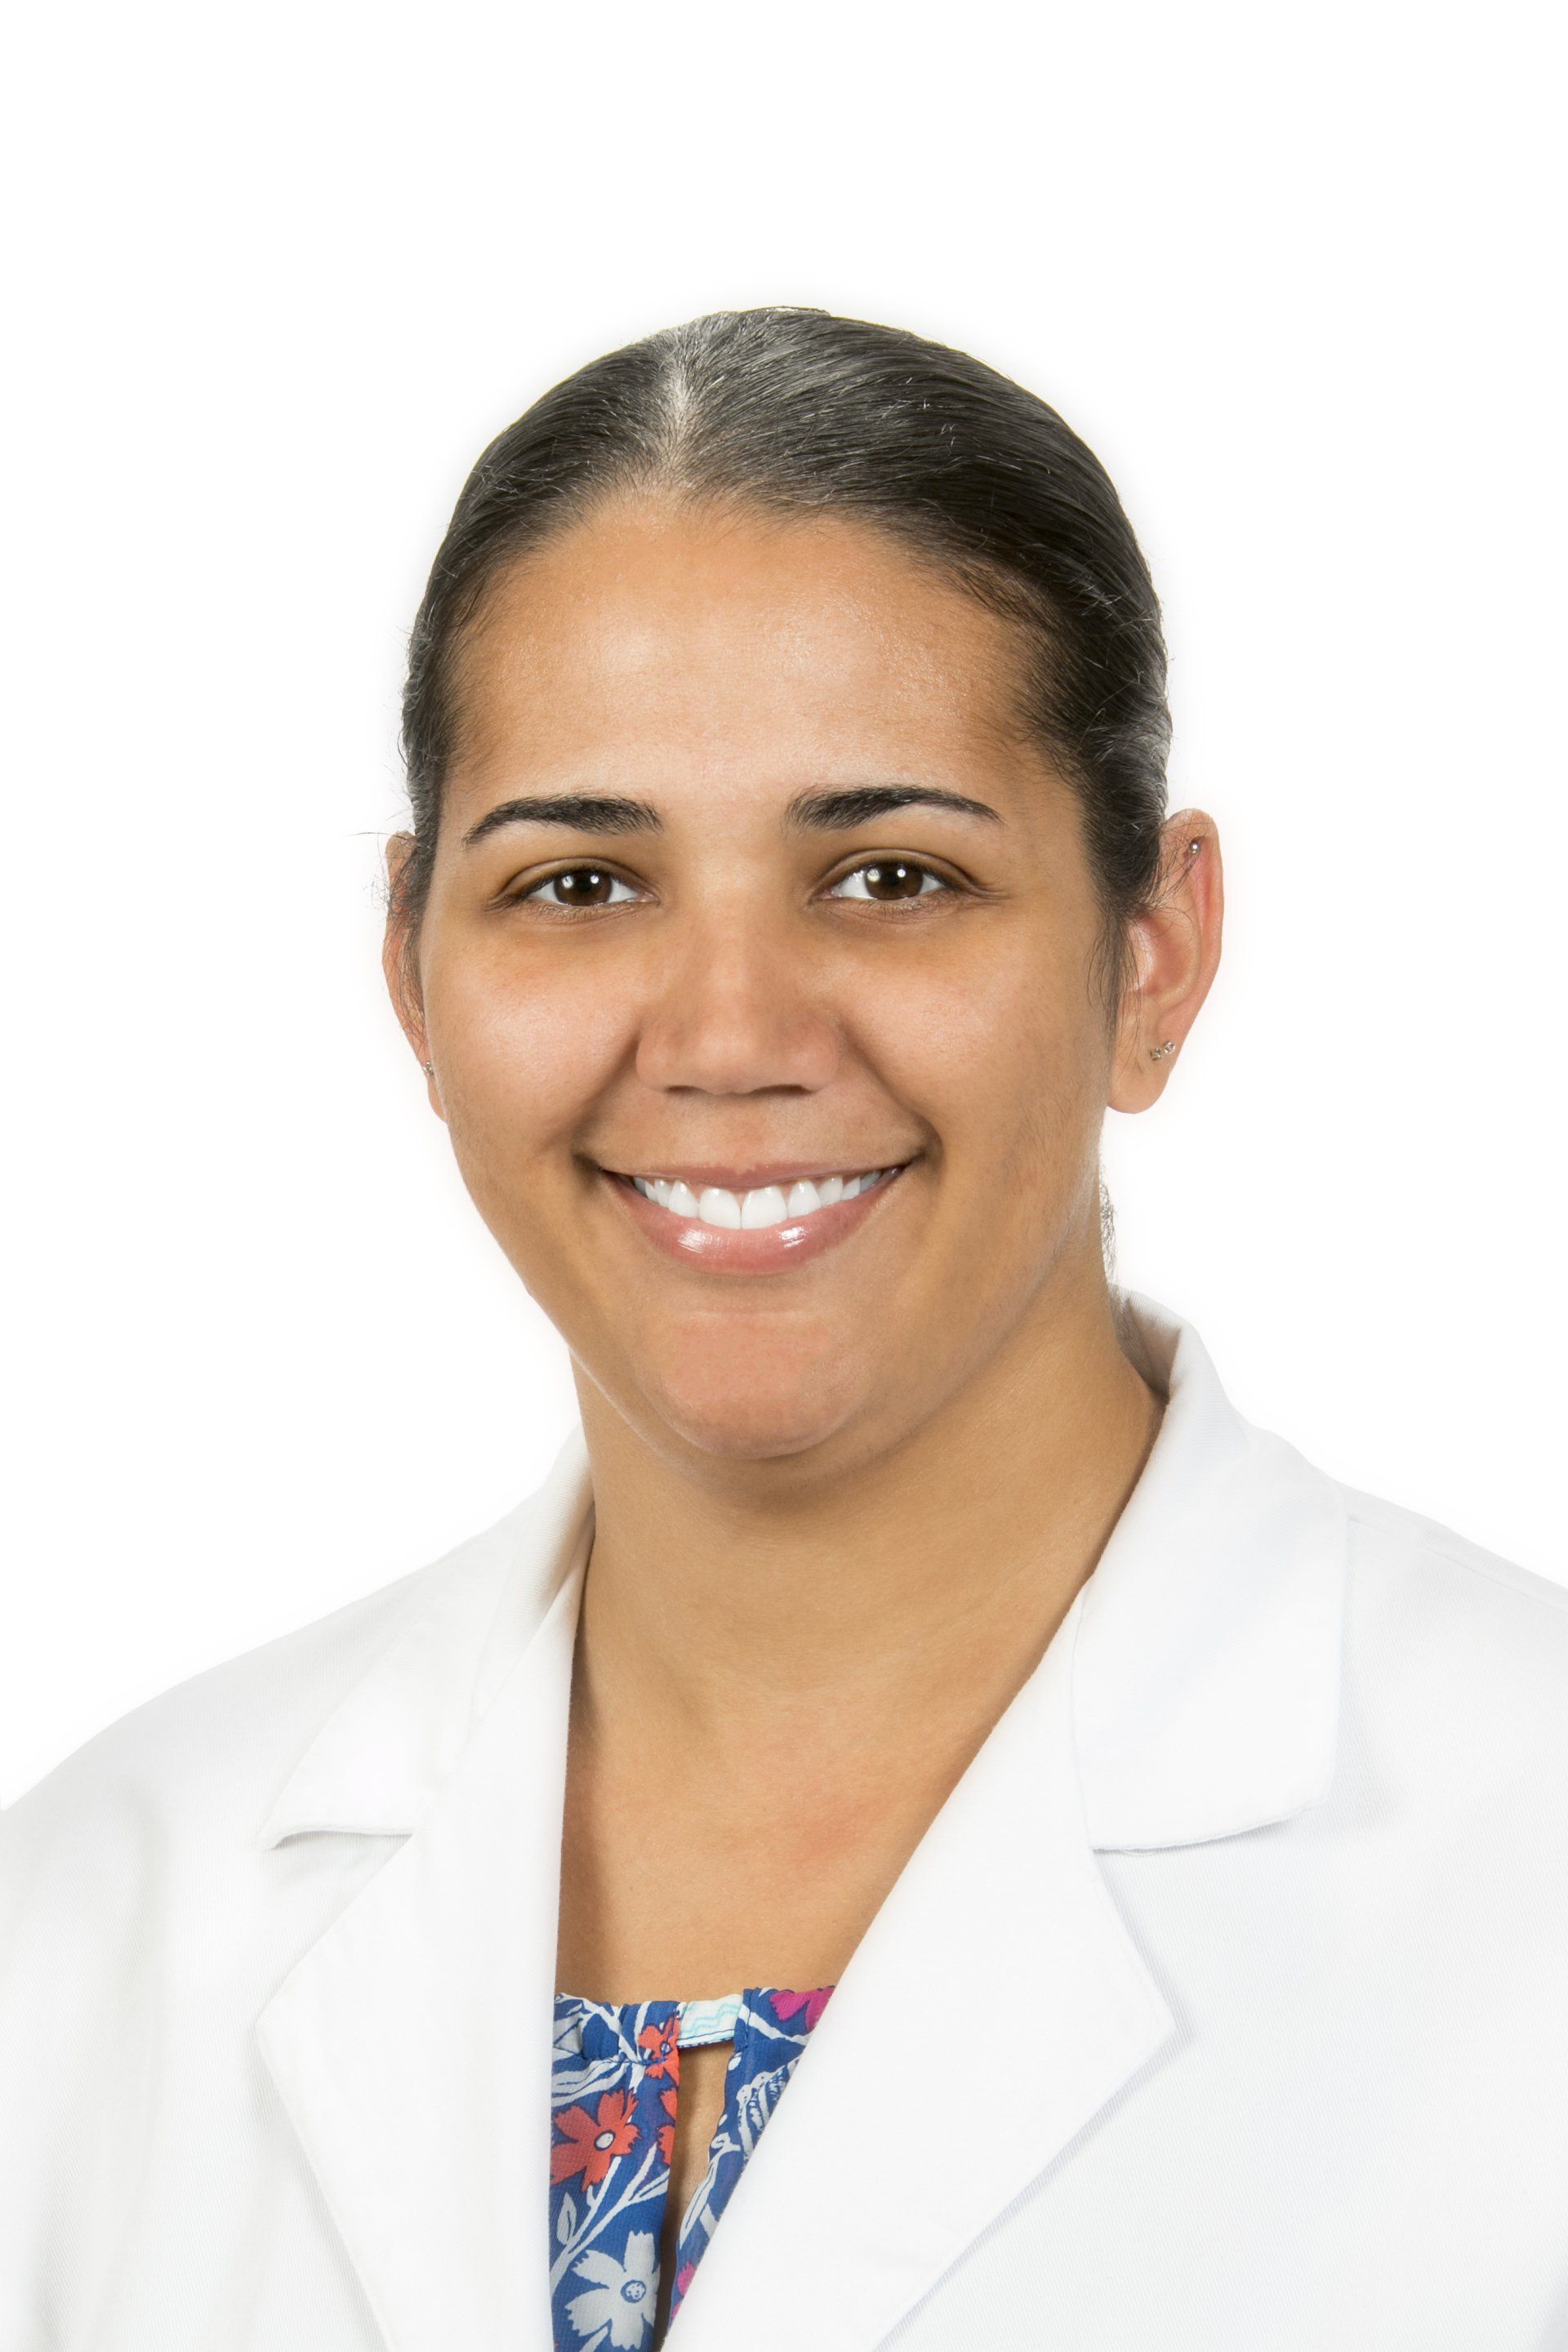 Patient Advocate — Kayla D. Mapps, M.D. in Stockton, CA